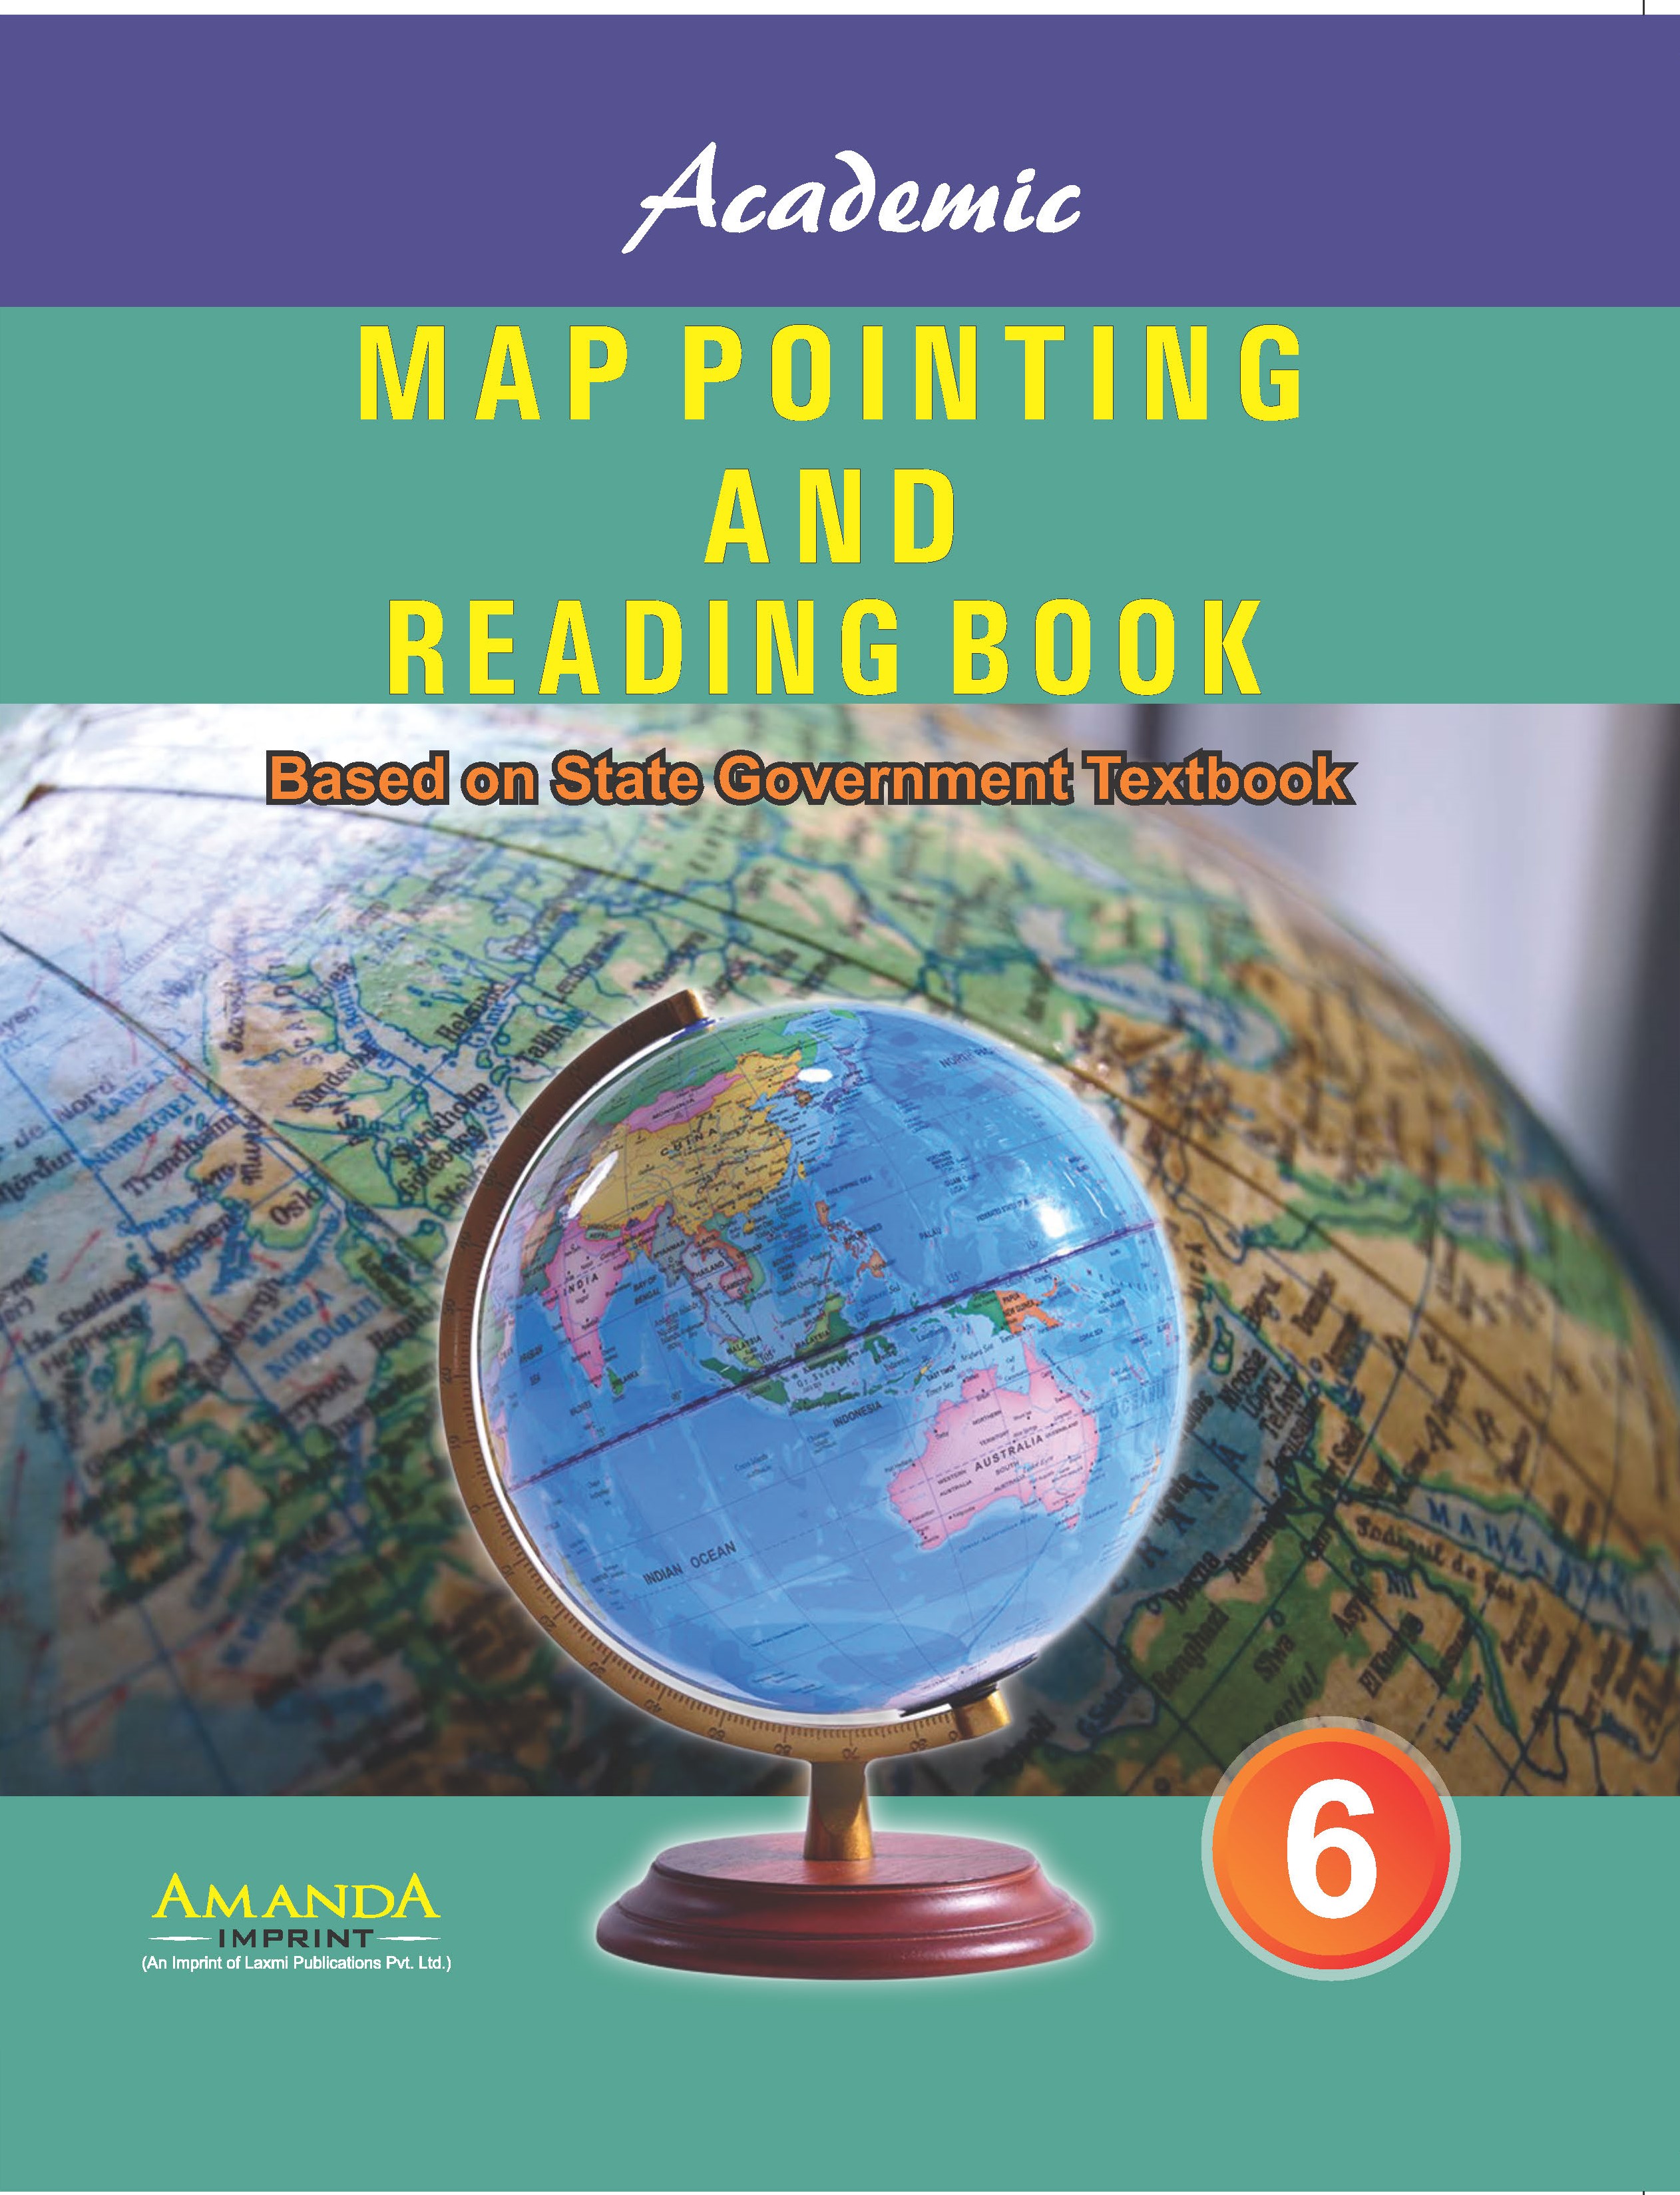 ACADEMIC MAP POINTING AND READING BOOK VI